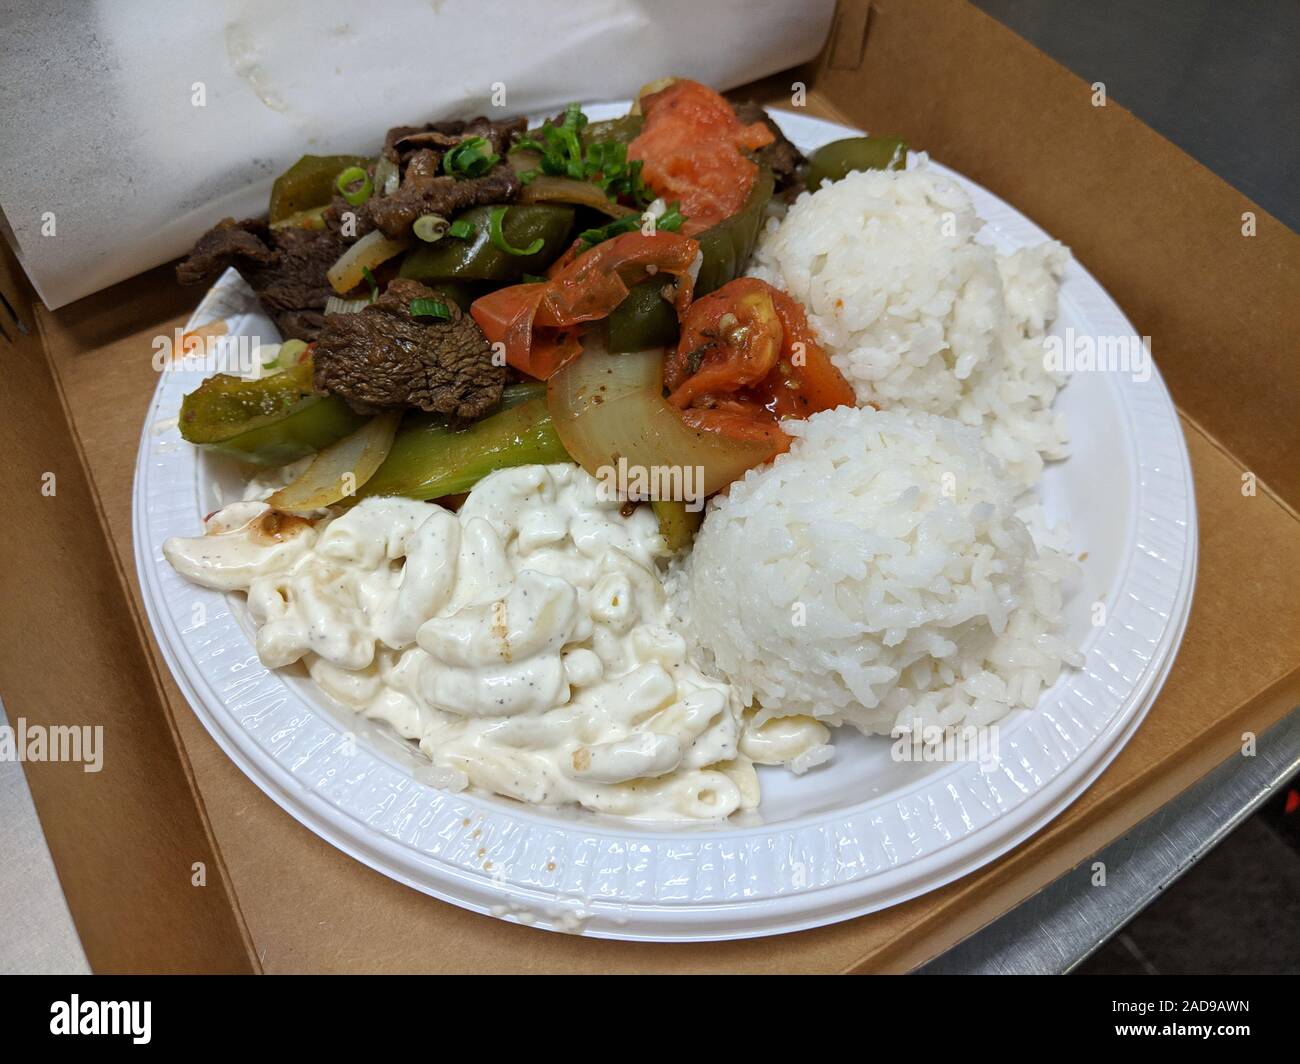 Chopped Steak with Vegetables Plate - Tender sliced beef stir-fried with onions, celery, bell peppers and tomatoes with white rice and mac salad. Stock Photo